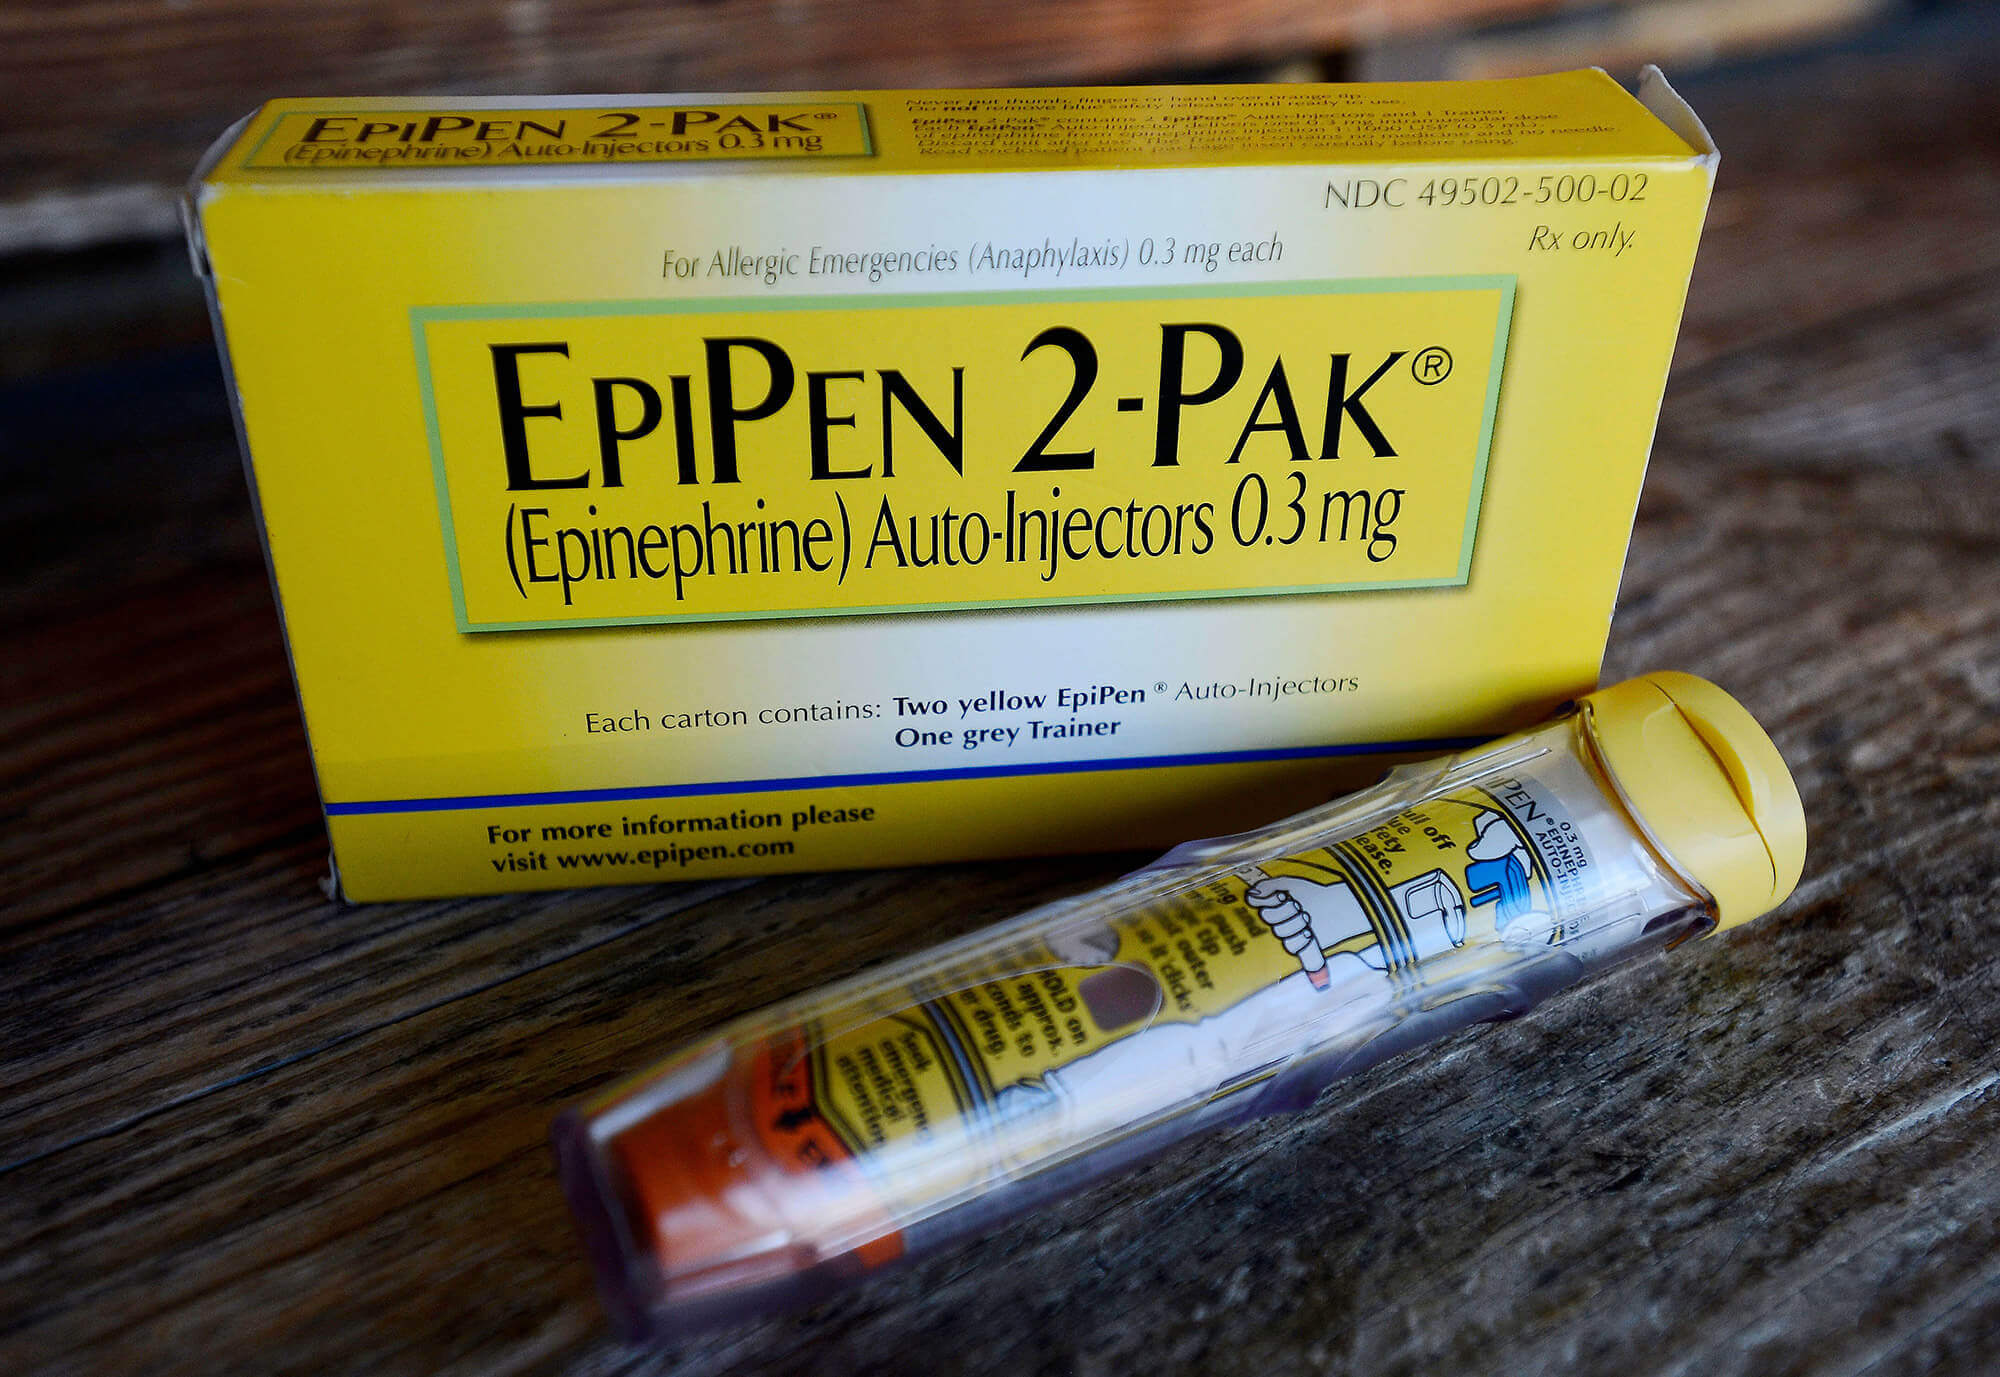 Image of an EpiPen epinephrine auto-injector, a Mylan product